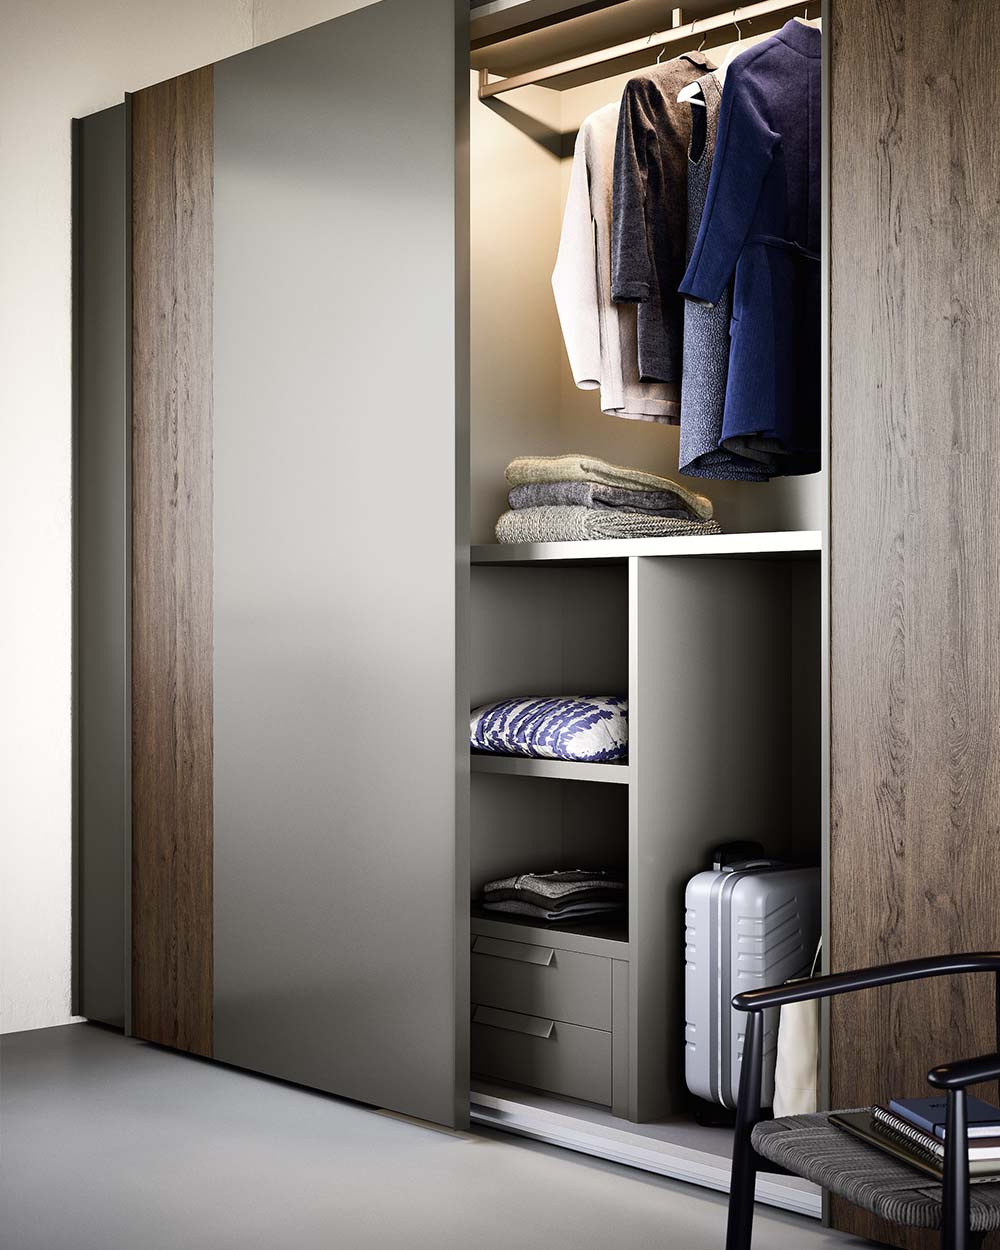 A luxury, modern and contemporary sliding wardrobe. Made in Italy with a choice of mirror, wood and matt lacquered finishes. Designed and installed by Krieder.